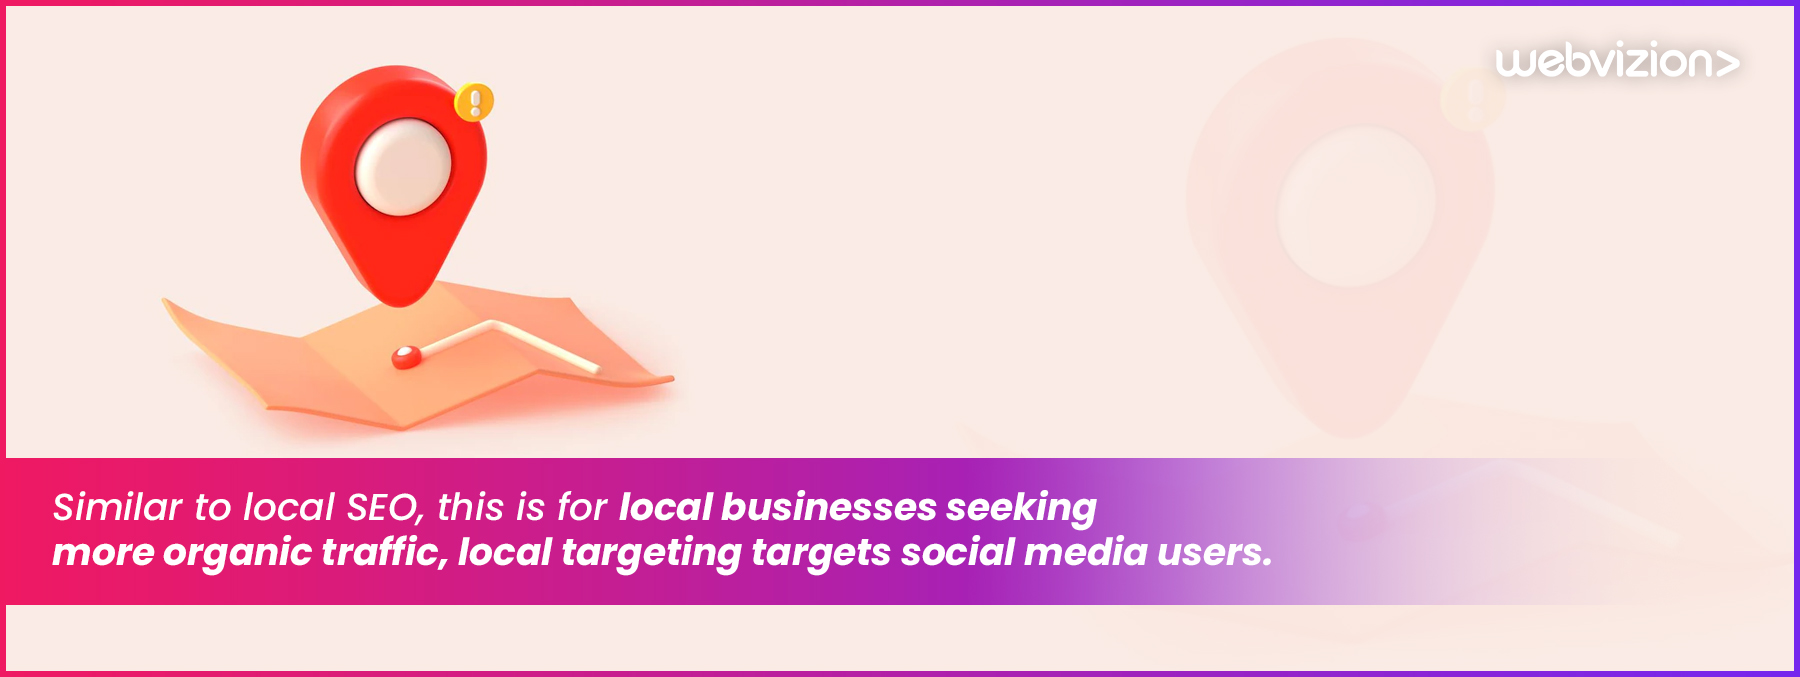 Local-Targeting-Will-Prevail-More-Webvizion-Global